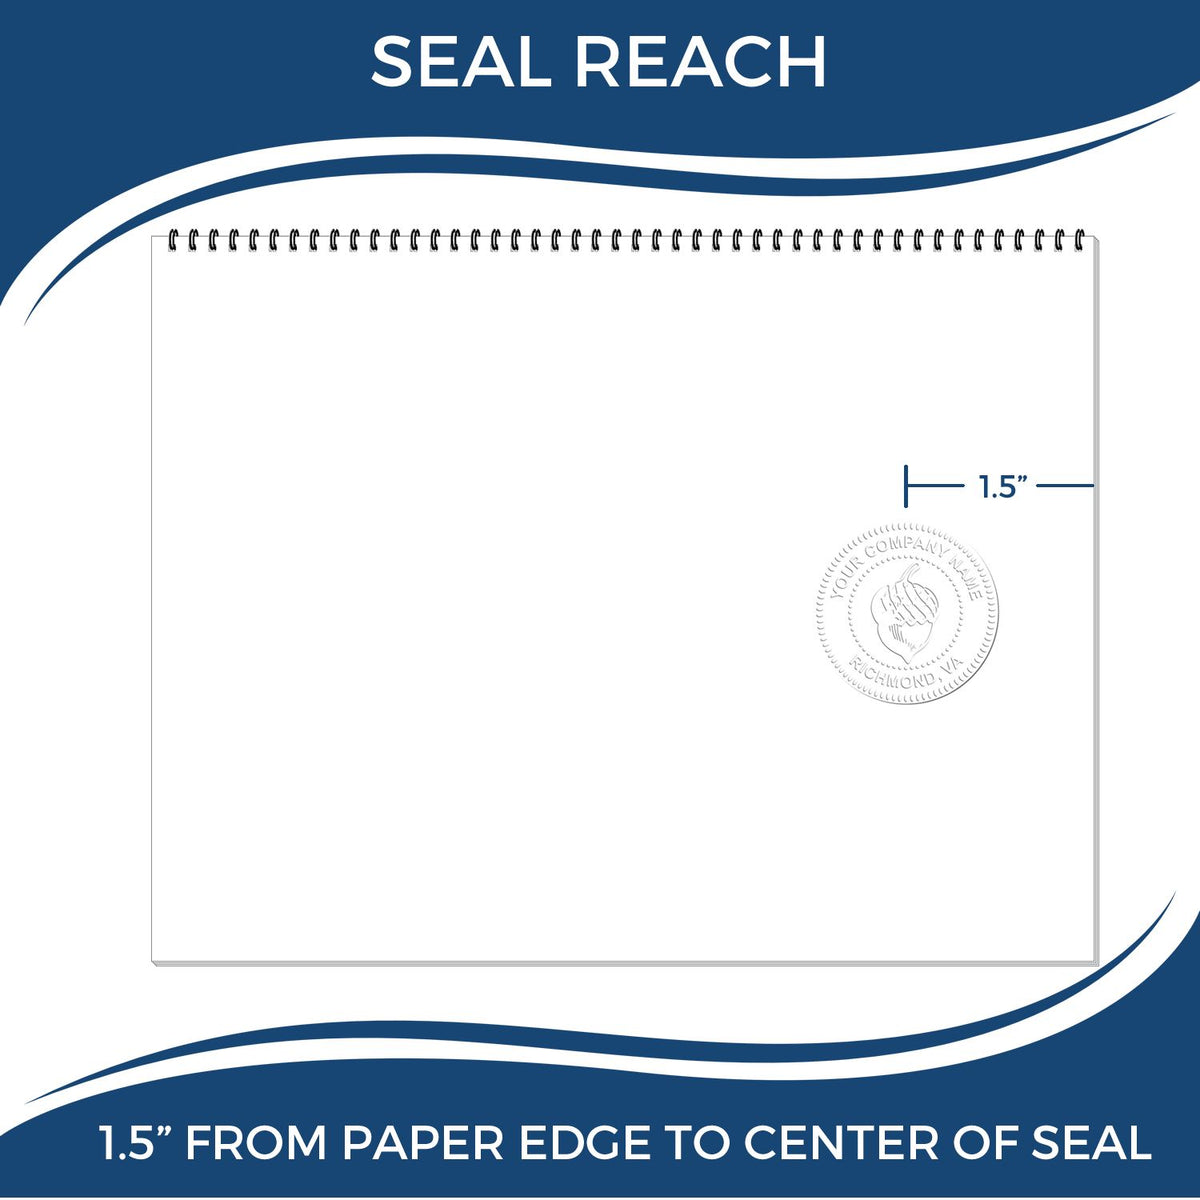 An infographic showing the seal reach which is represented by a ruler and a miniature seal image of the State of Pennsylvania Architectural Seal Embosser